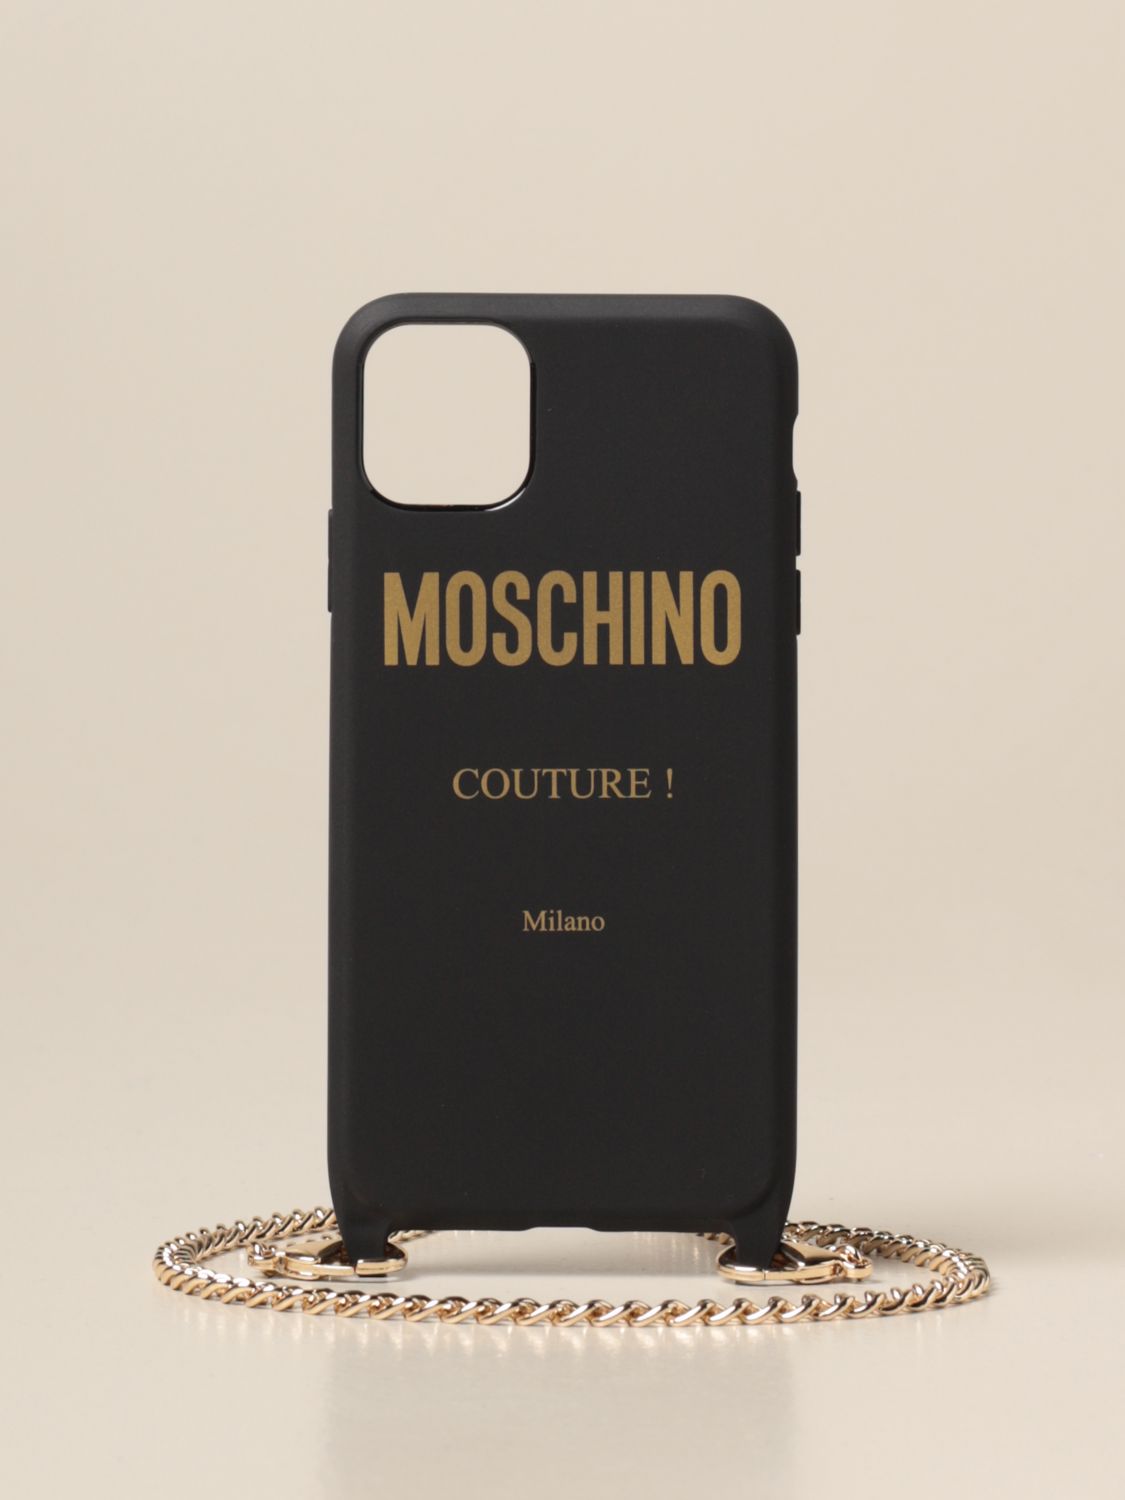 Moschino Couture Iphone 11 Pro Max Cover Case Moschino Couture Women Black Case Moschino Couture 7943 04 Giglio En